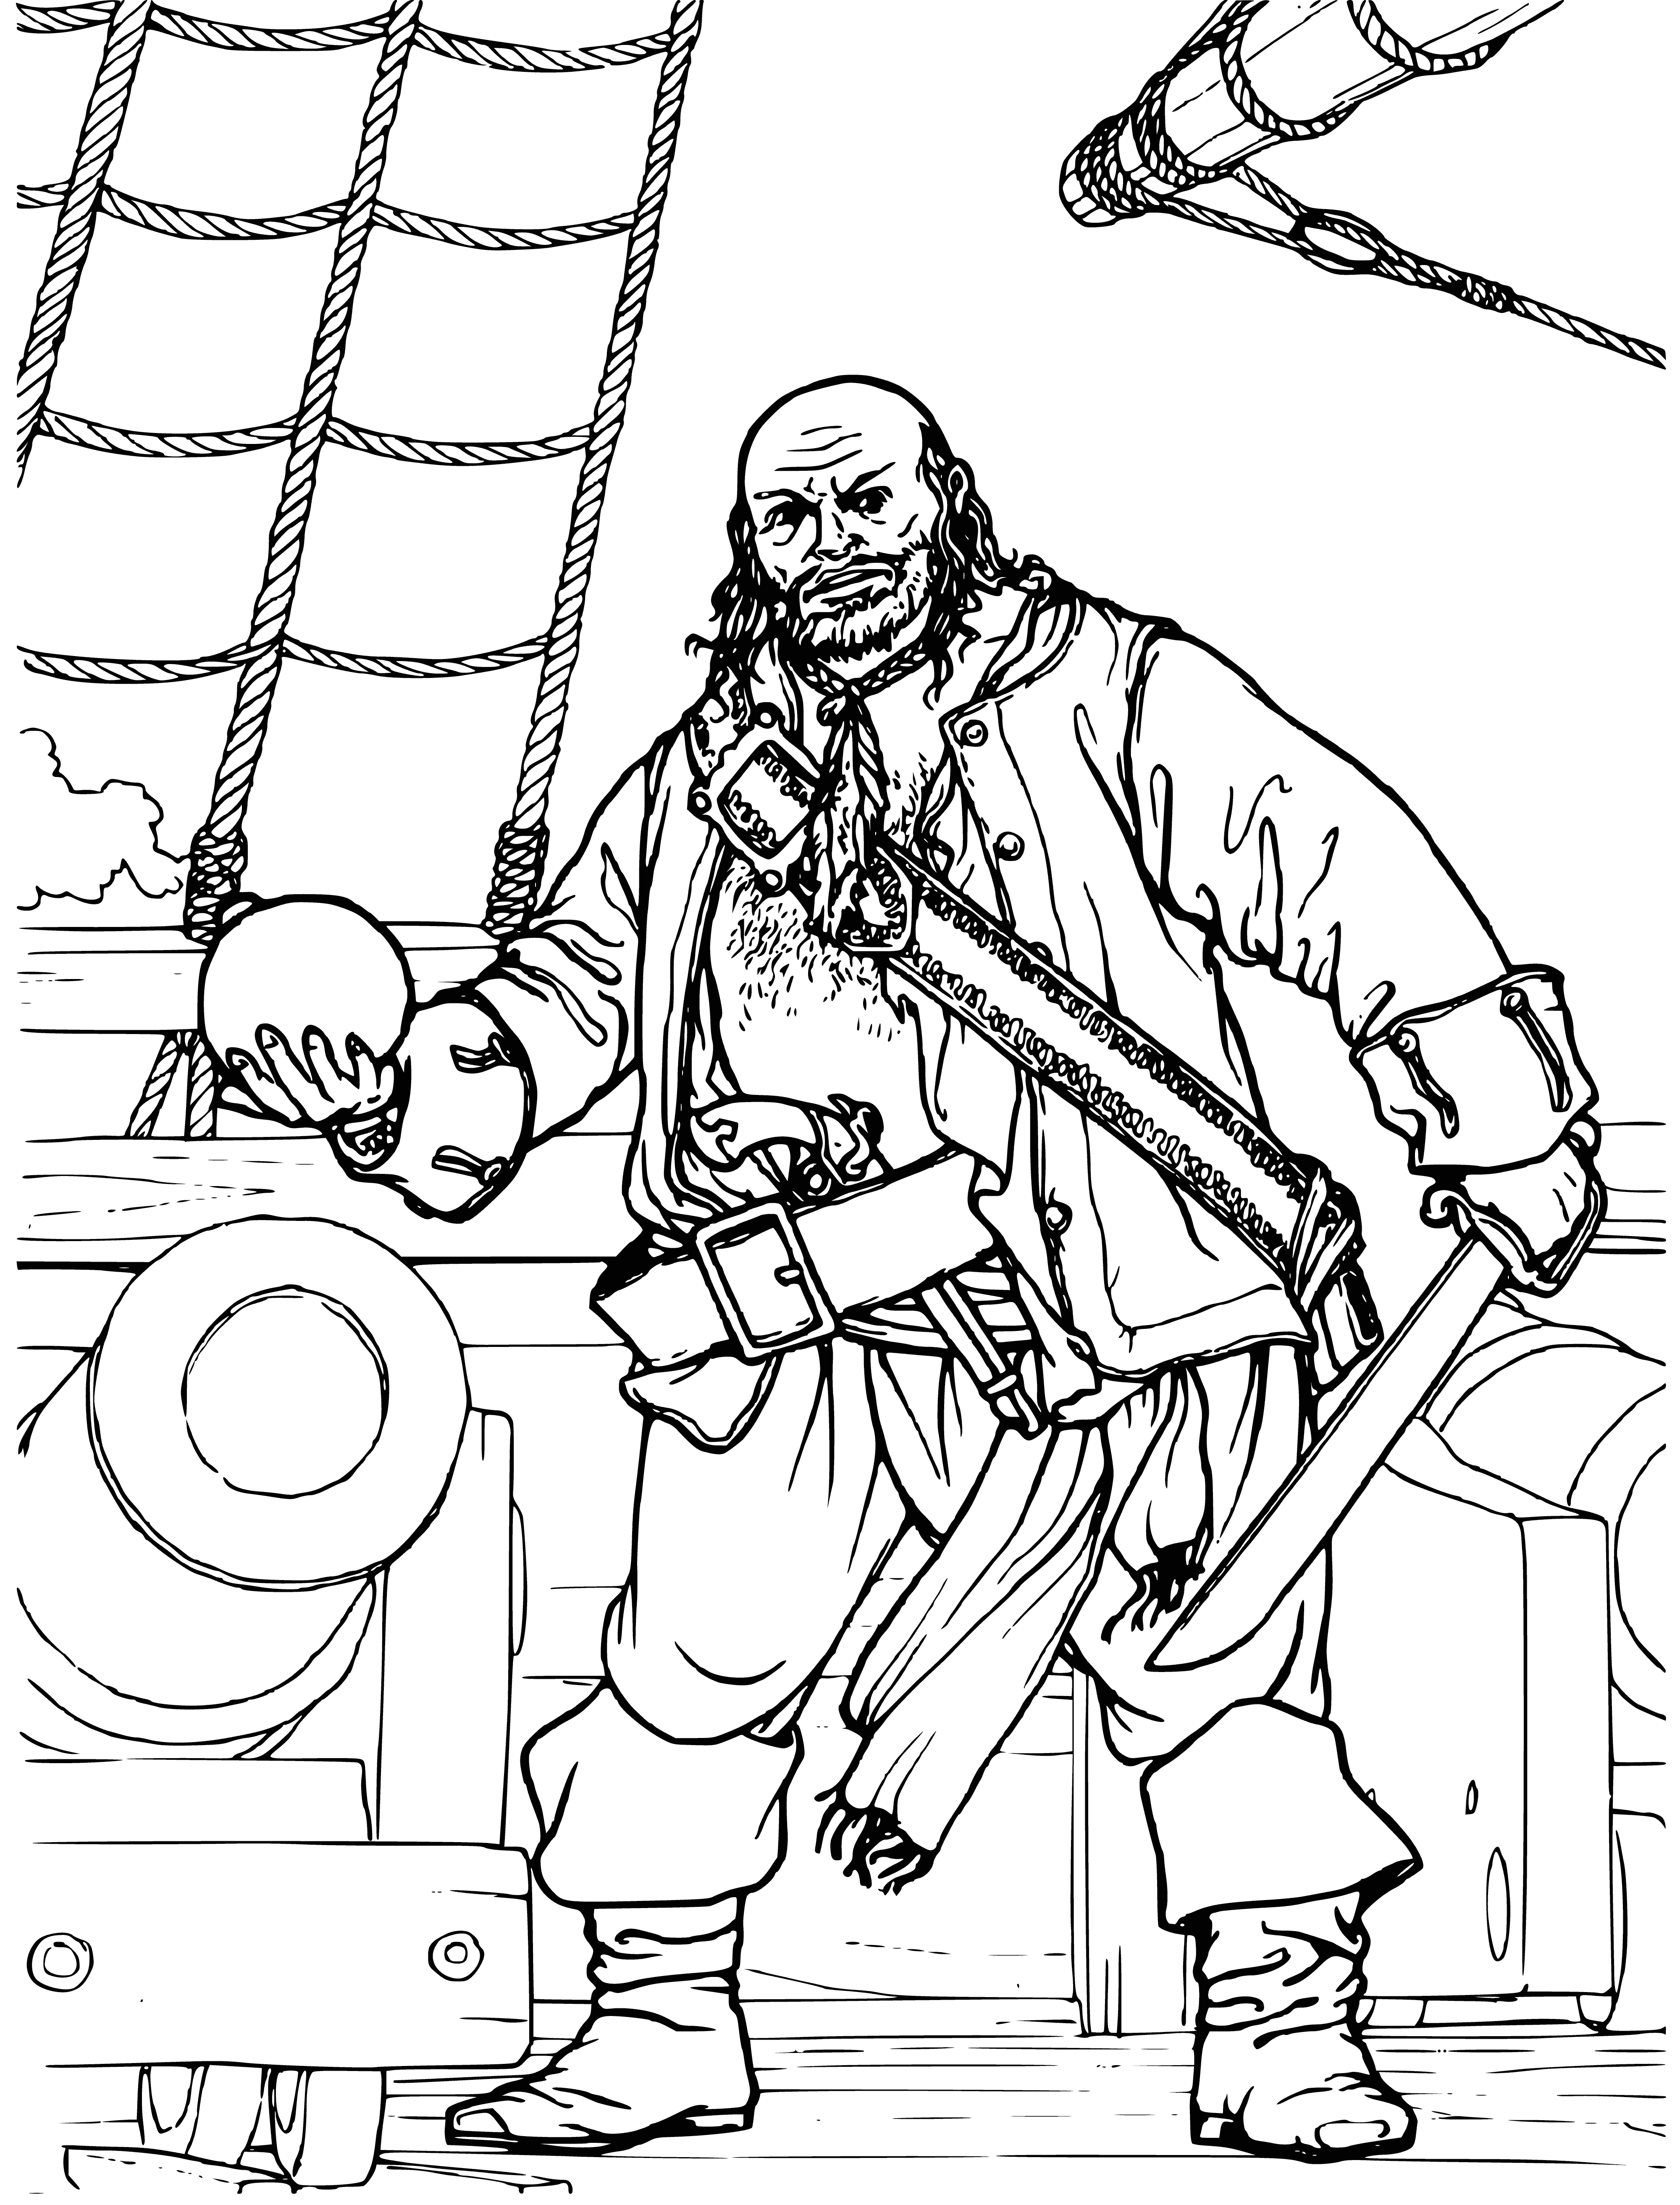 Pirate around rifles coloring page